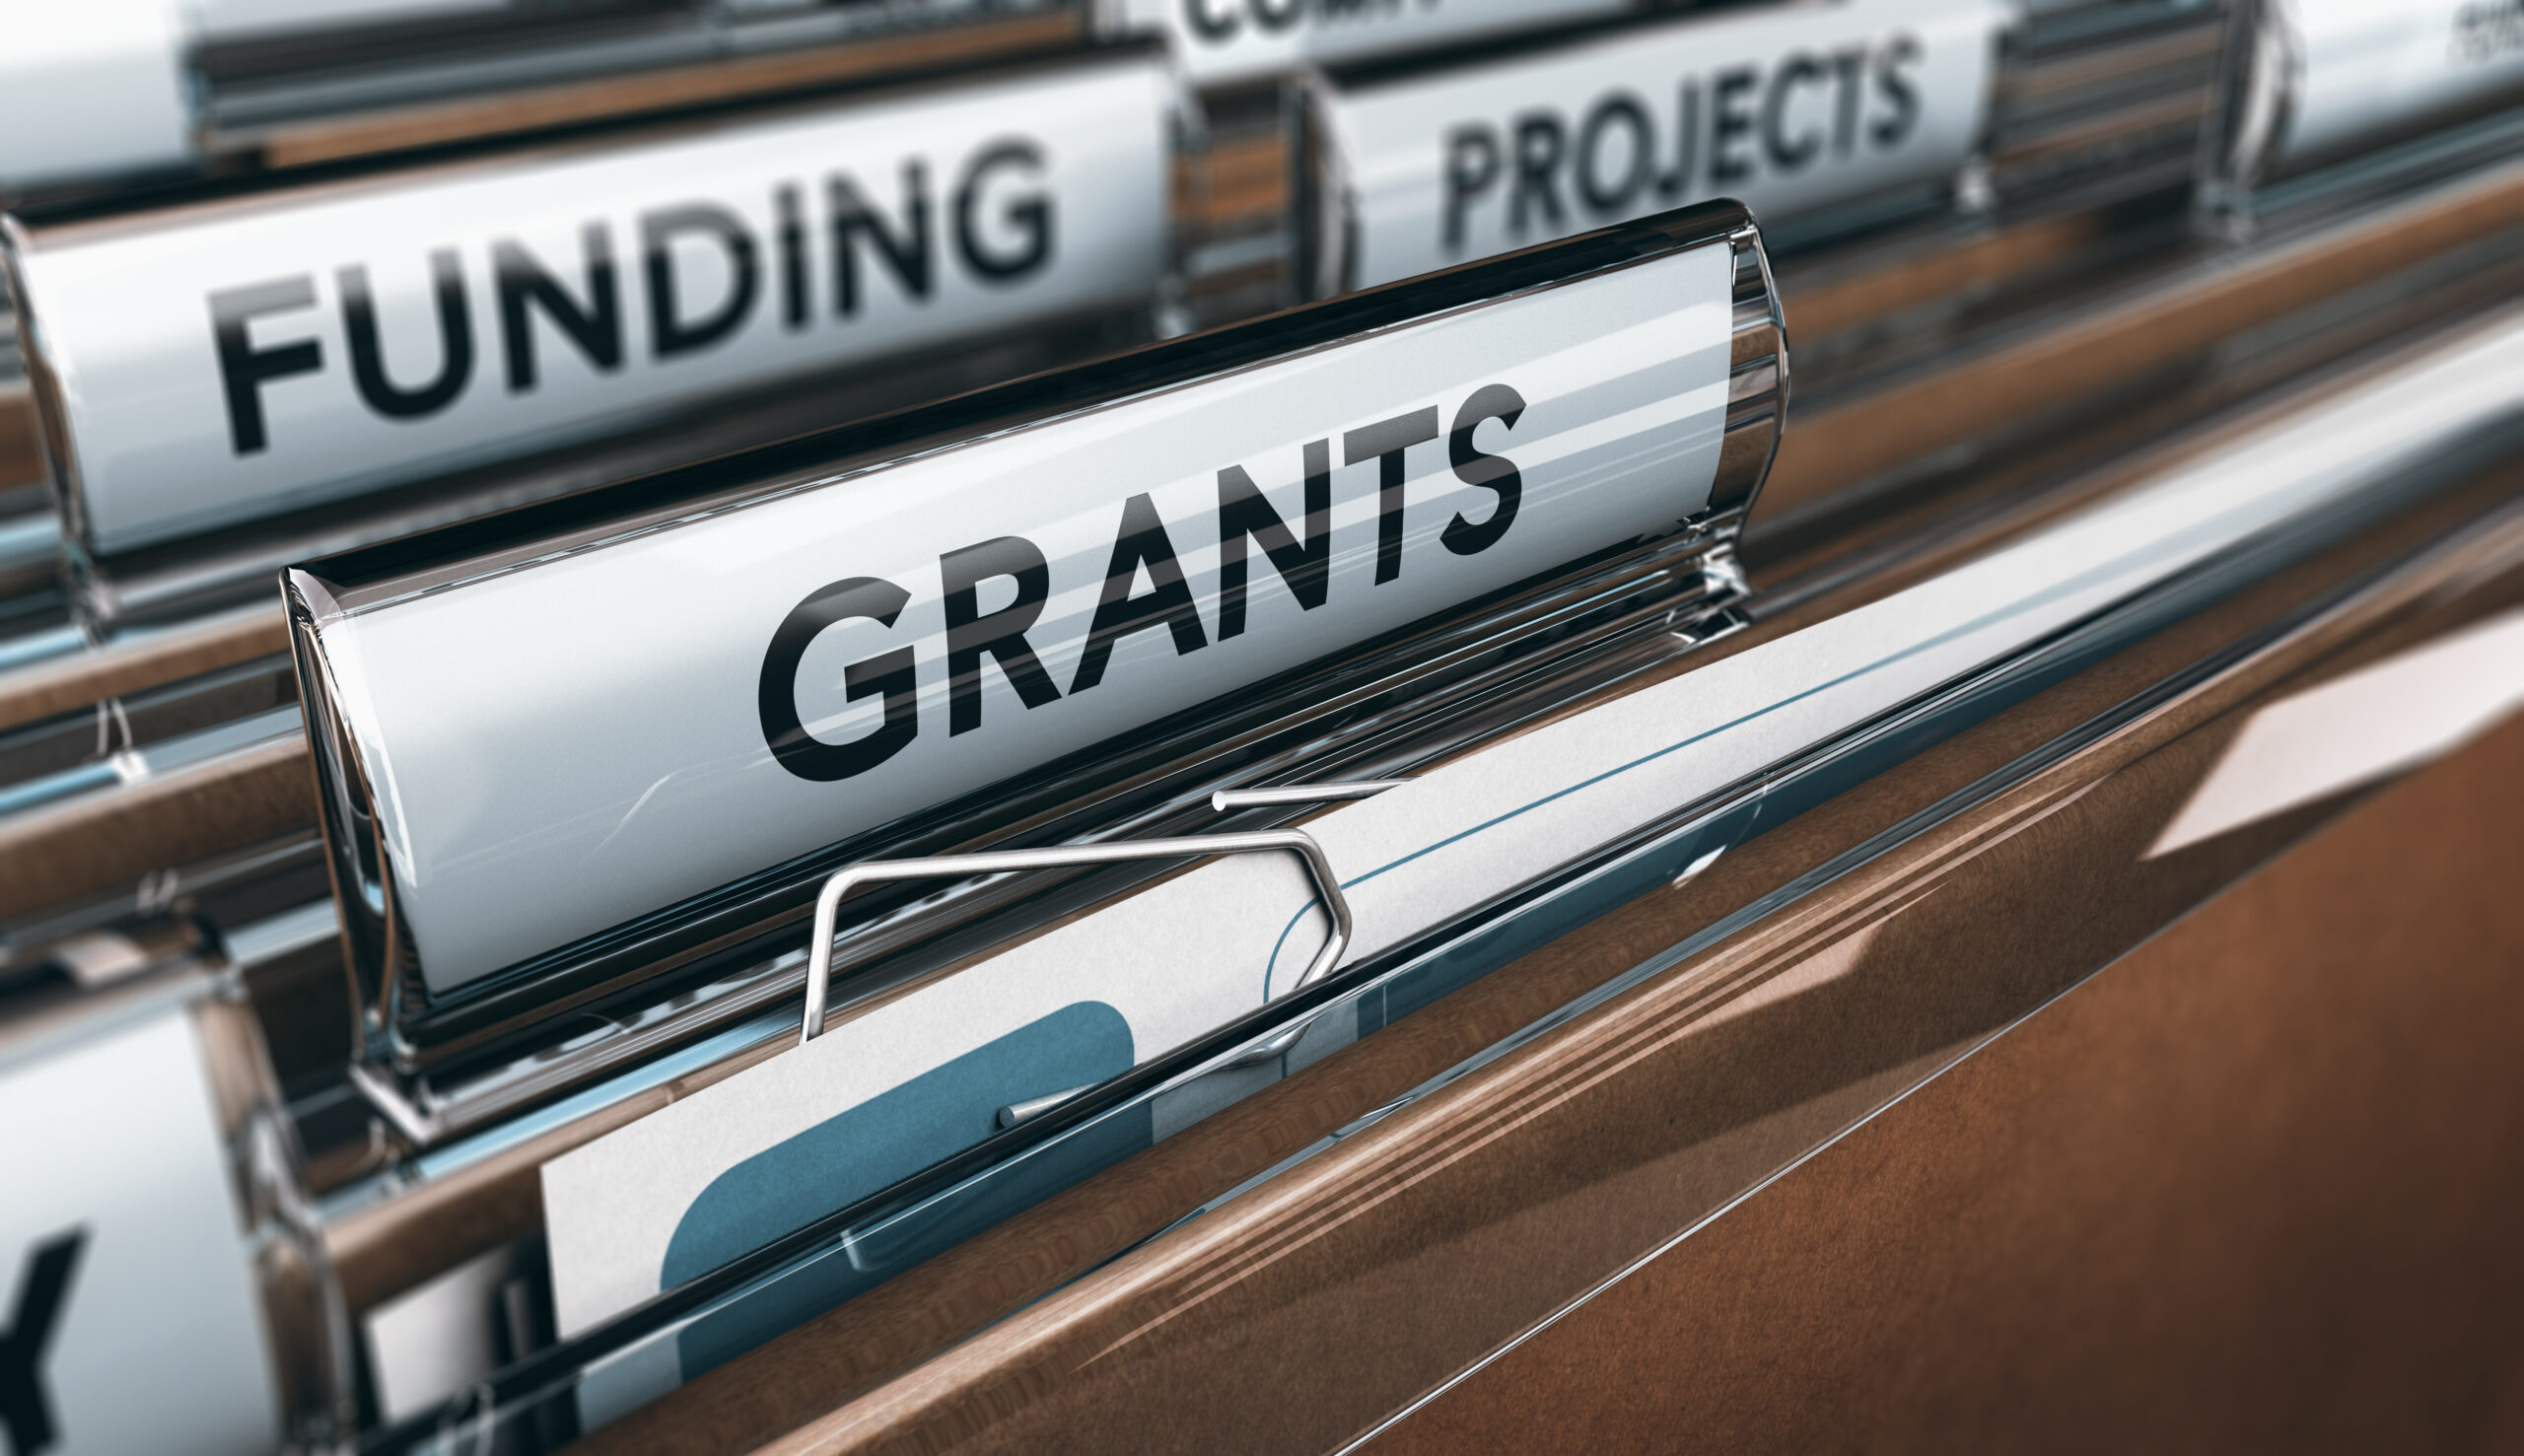 Seeking grants for business or research